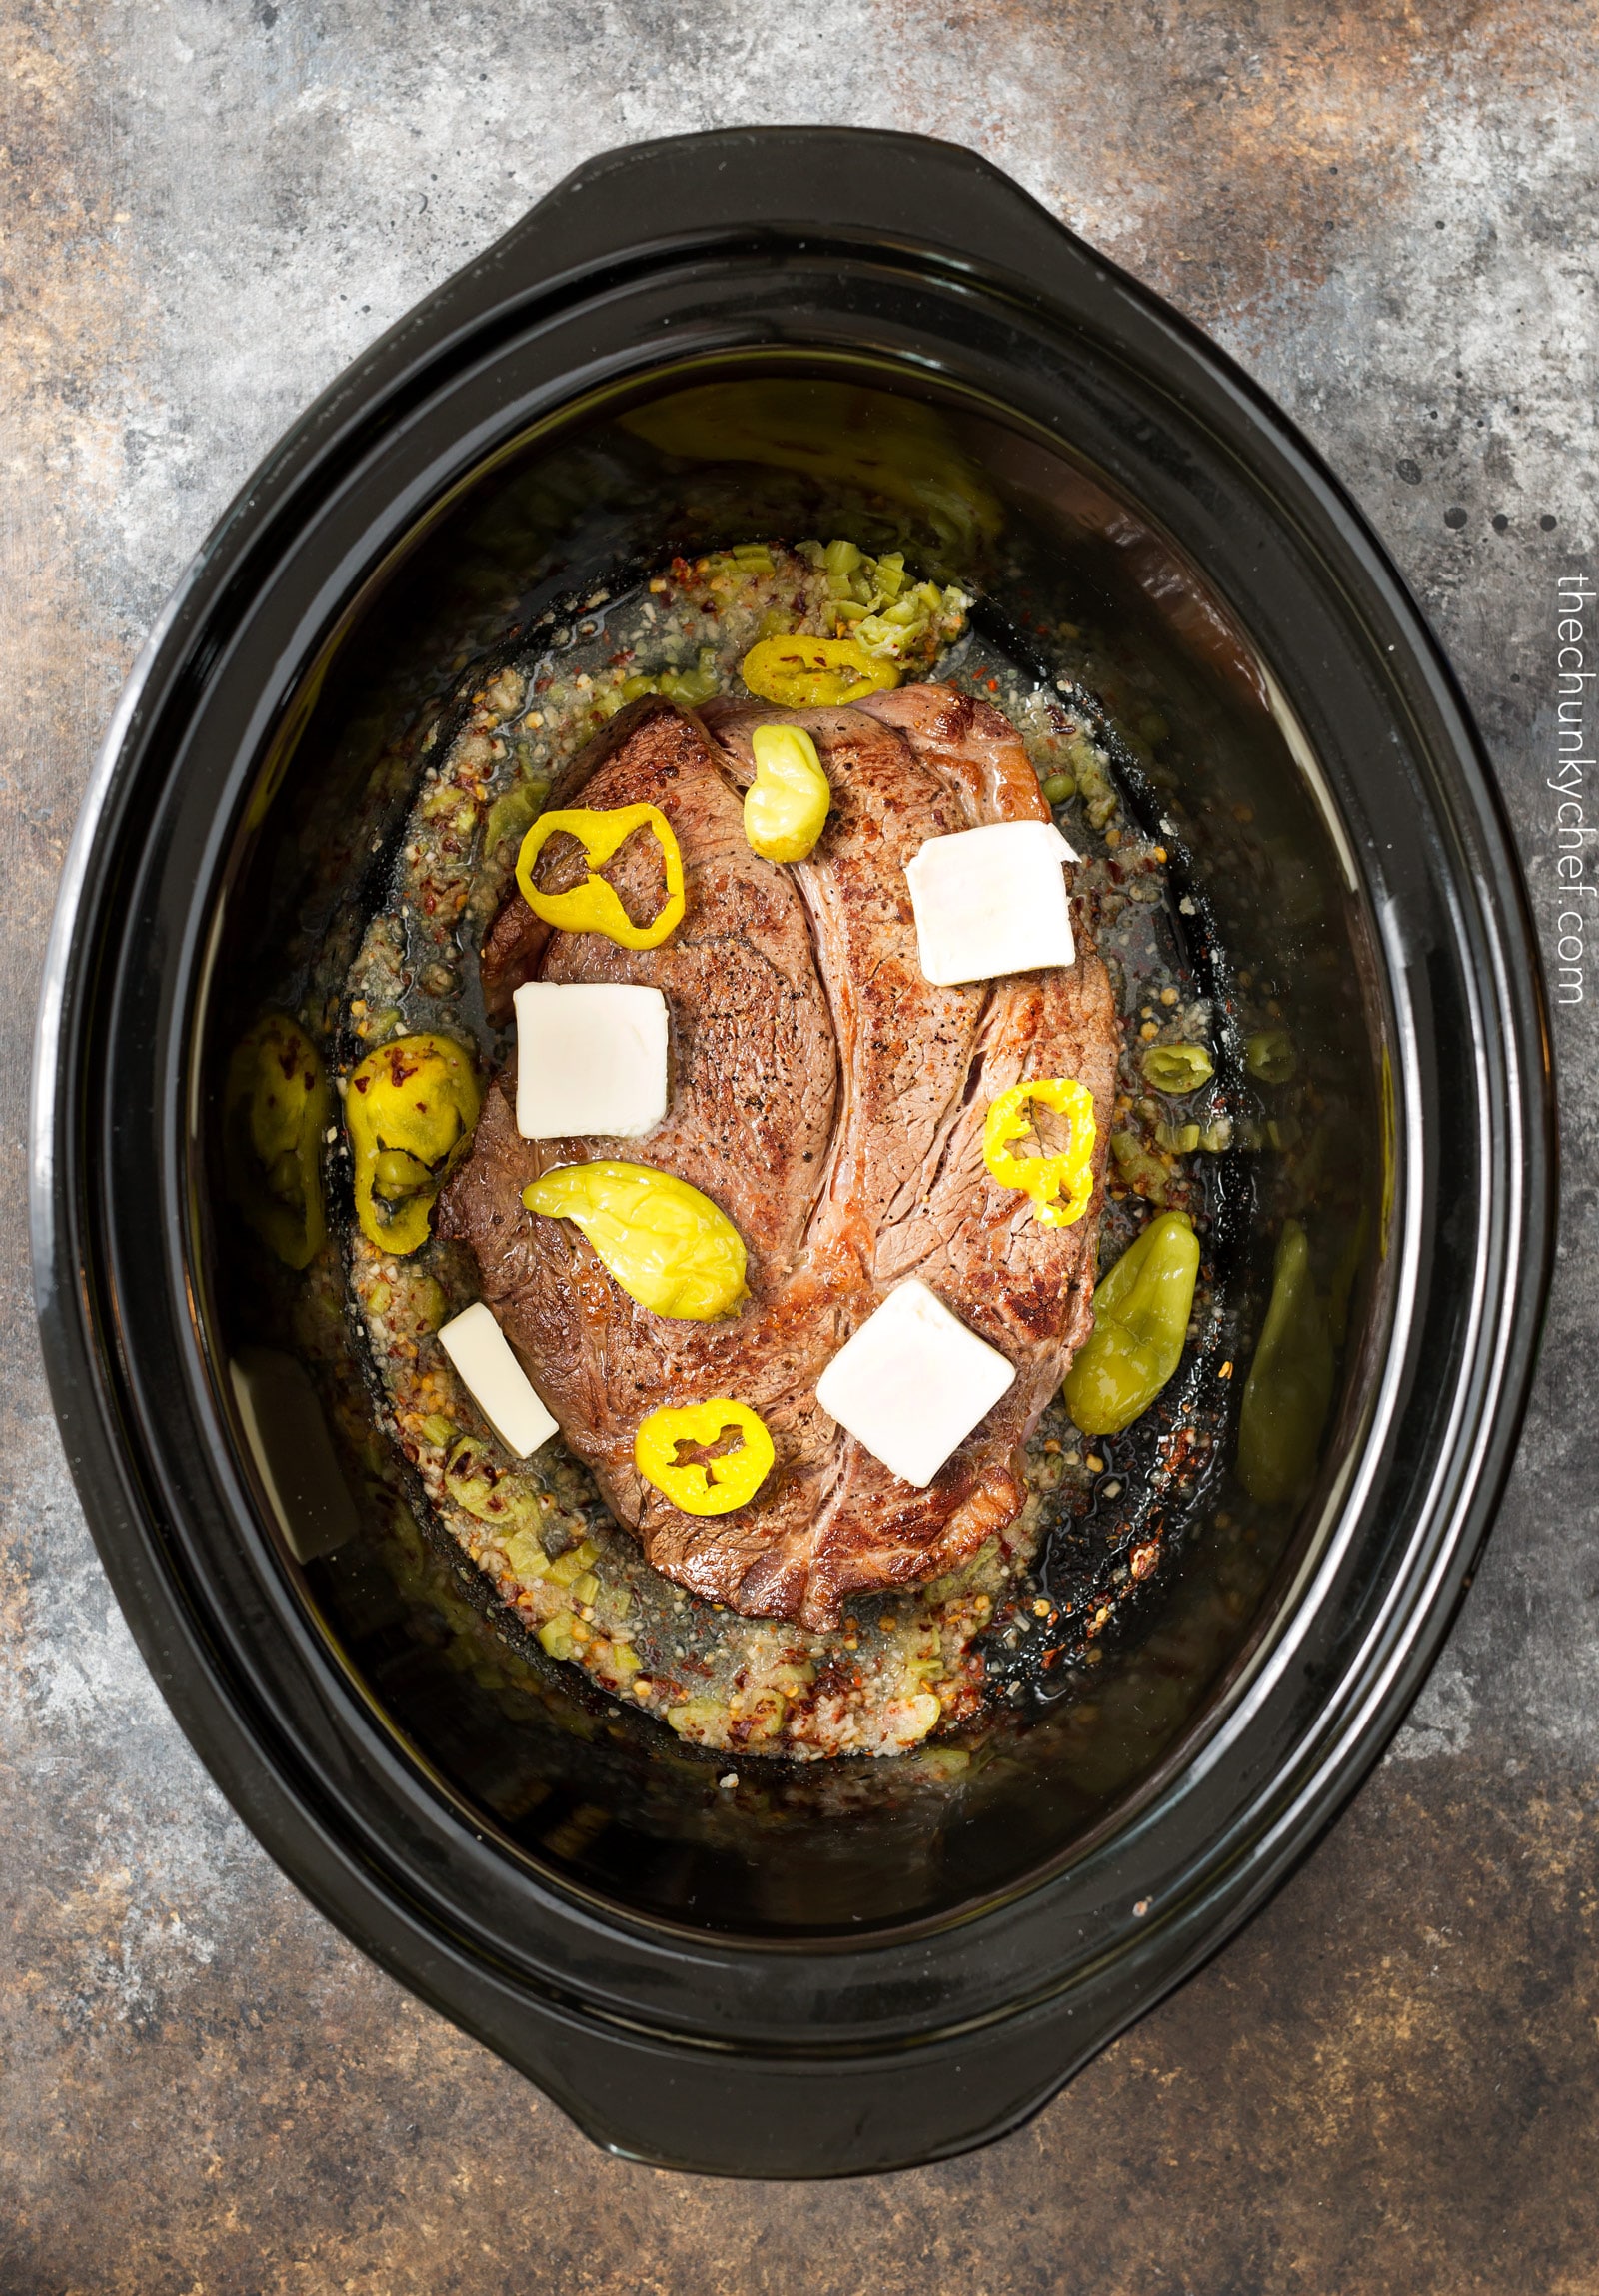 Slow Cooker Shredded Italian Beef | Tangy and spicy, this Italian beef is easily cooked in a slow cooker until fork tender, then shredded, for the ultimate in delicious easy weeknight dinners! | http://thechunkychef.com